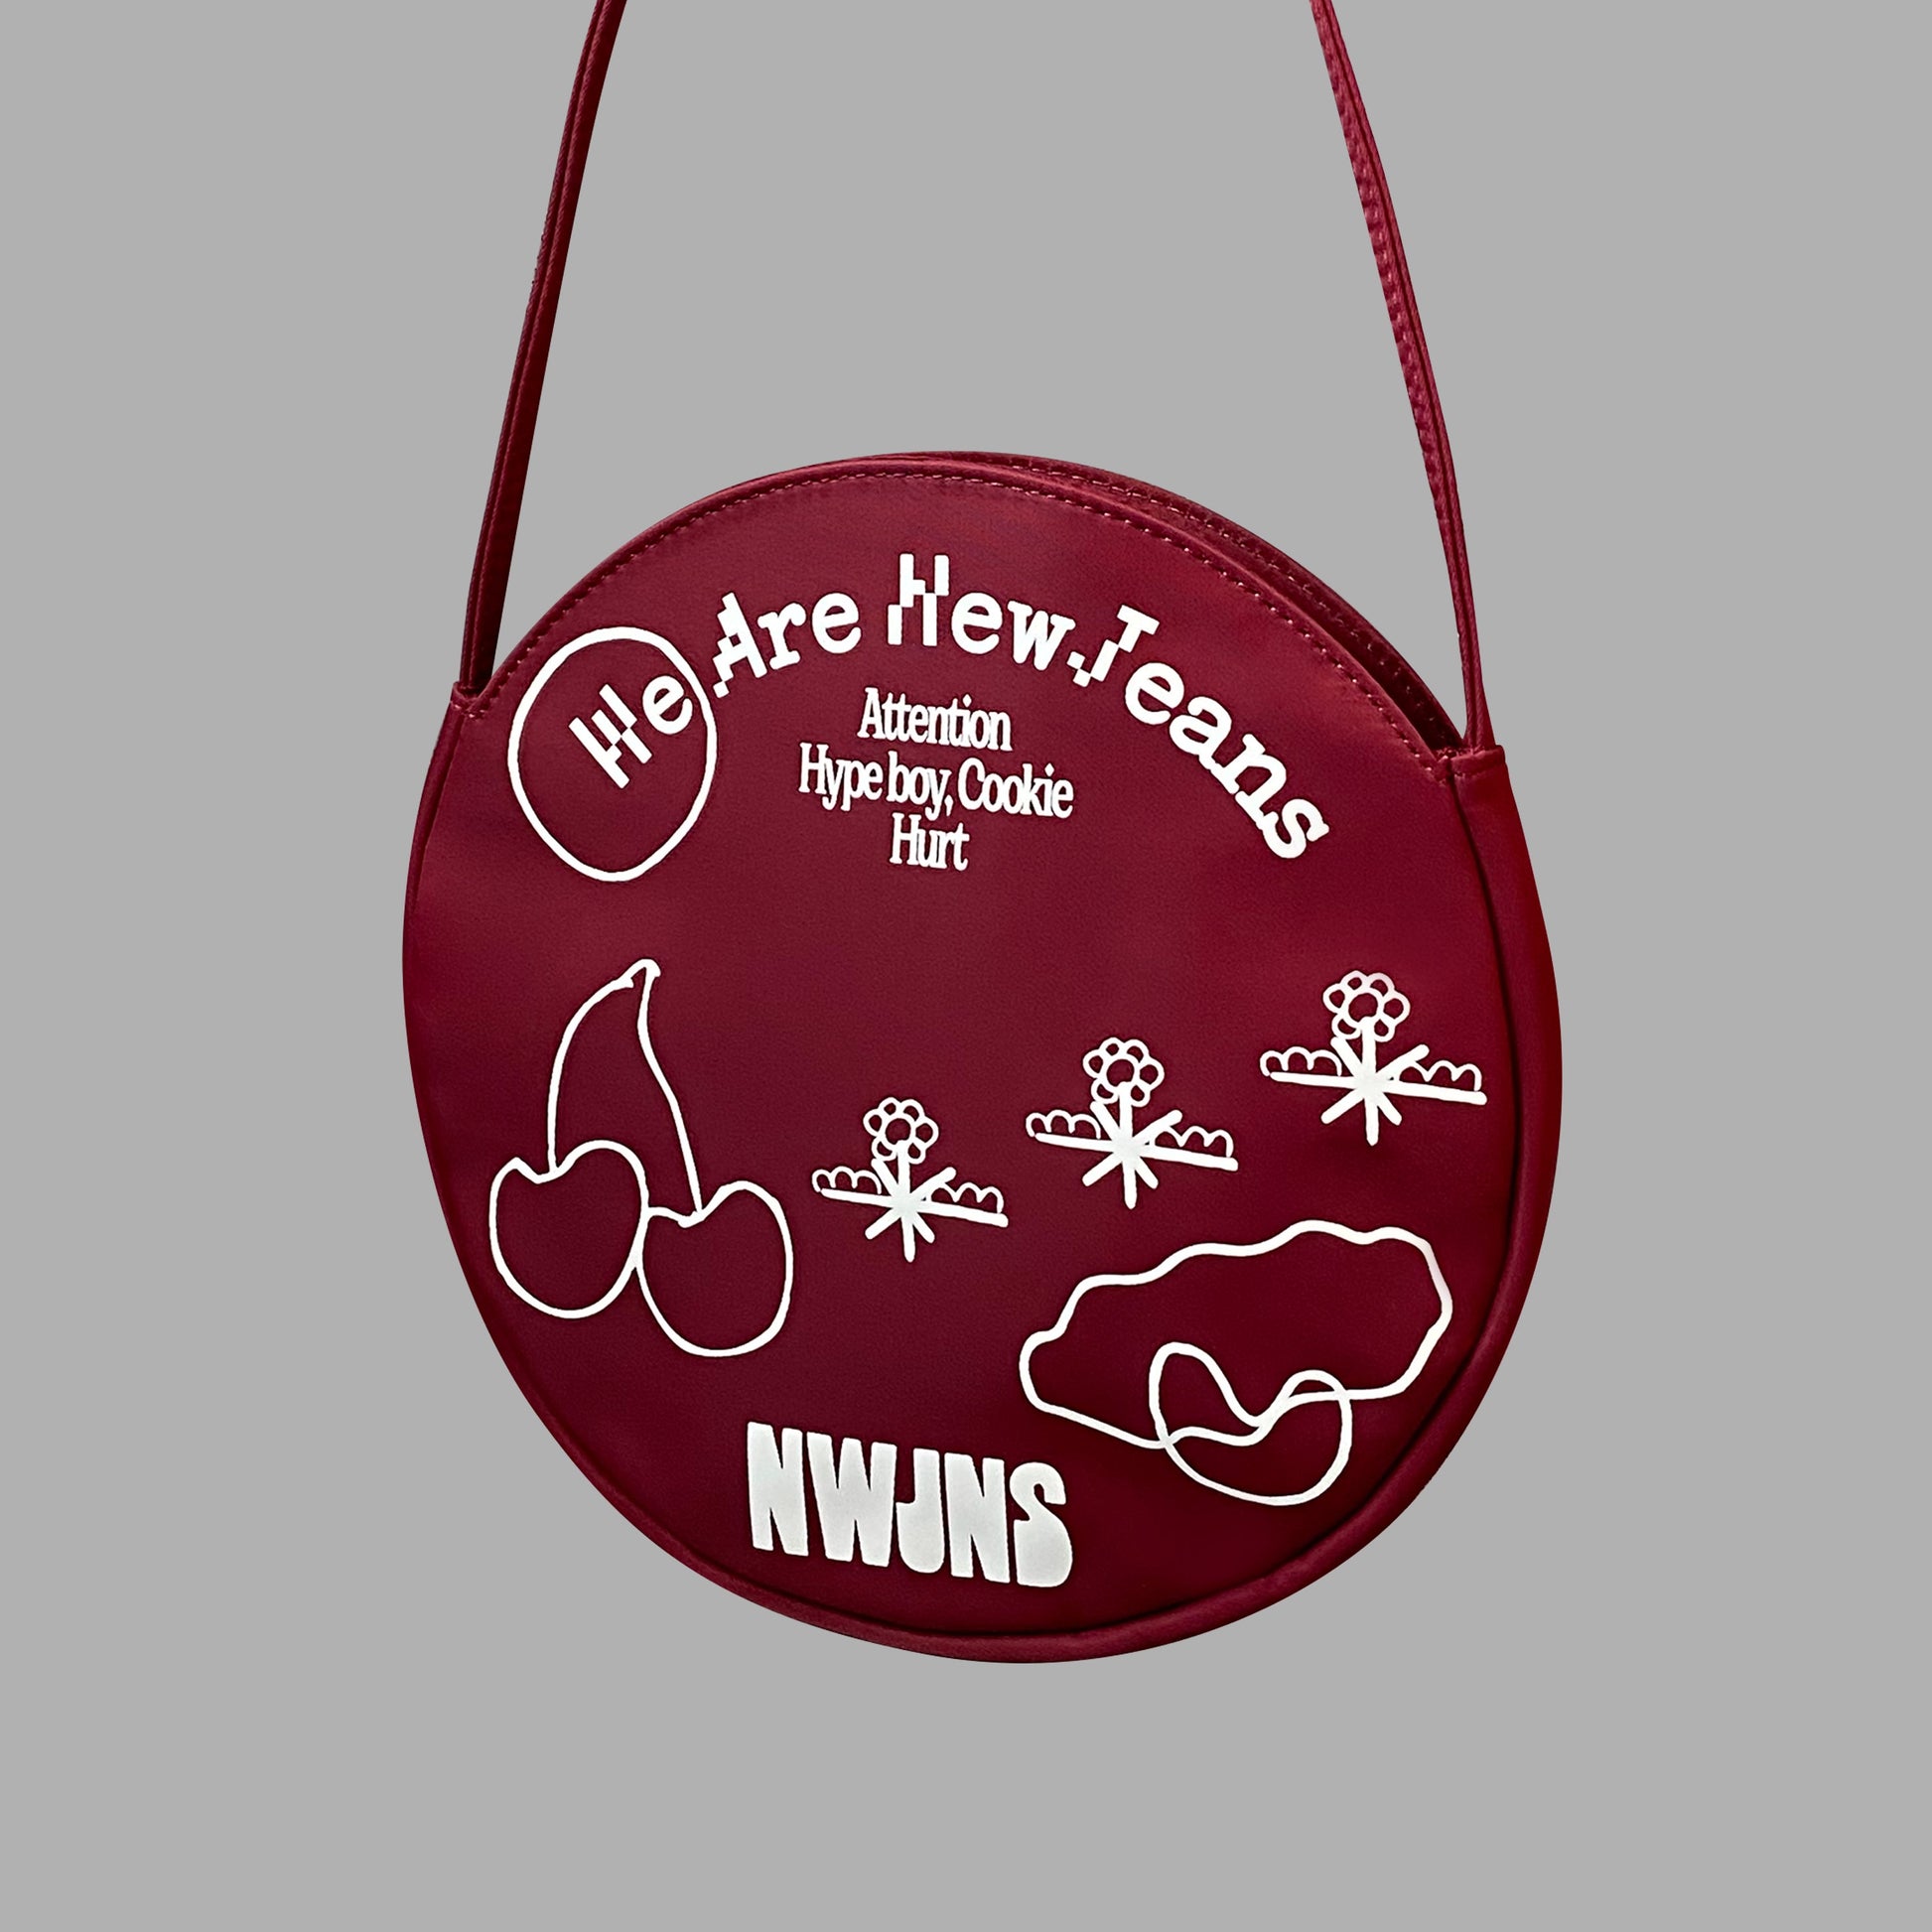 NEWJEANS 1ST EP ALBUM 'NEW JEANS' (BAG VERSION) RED VERSION COVER